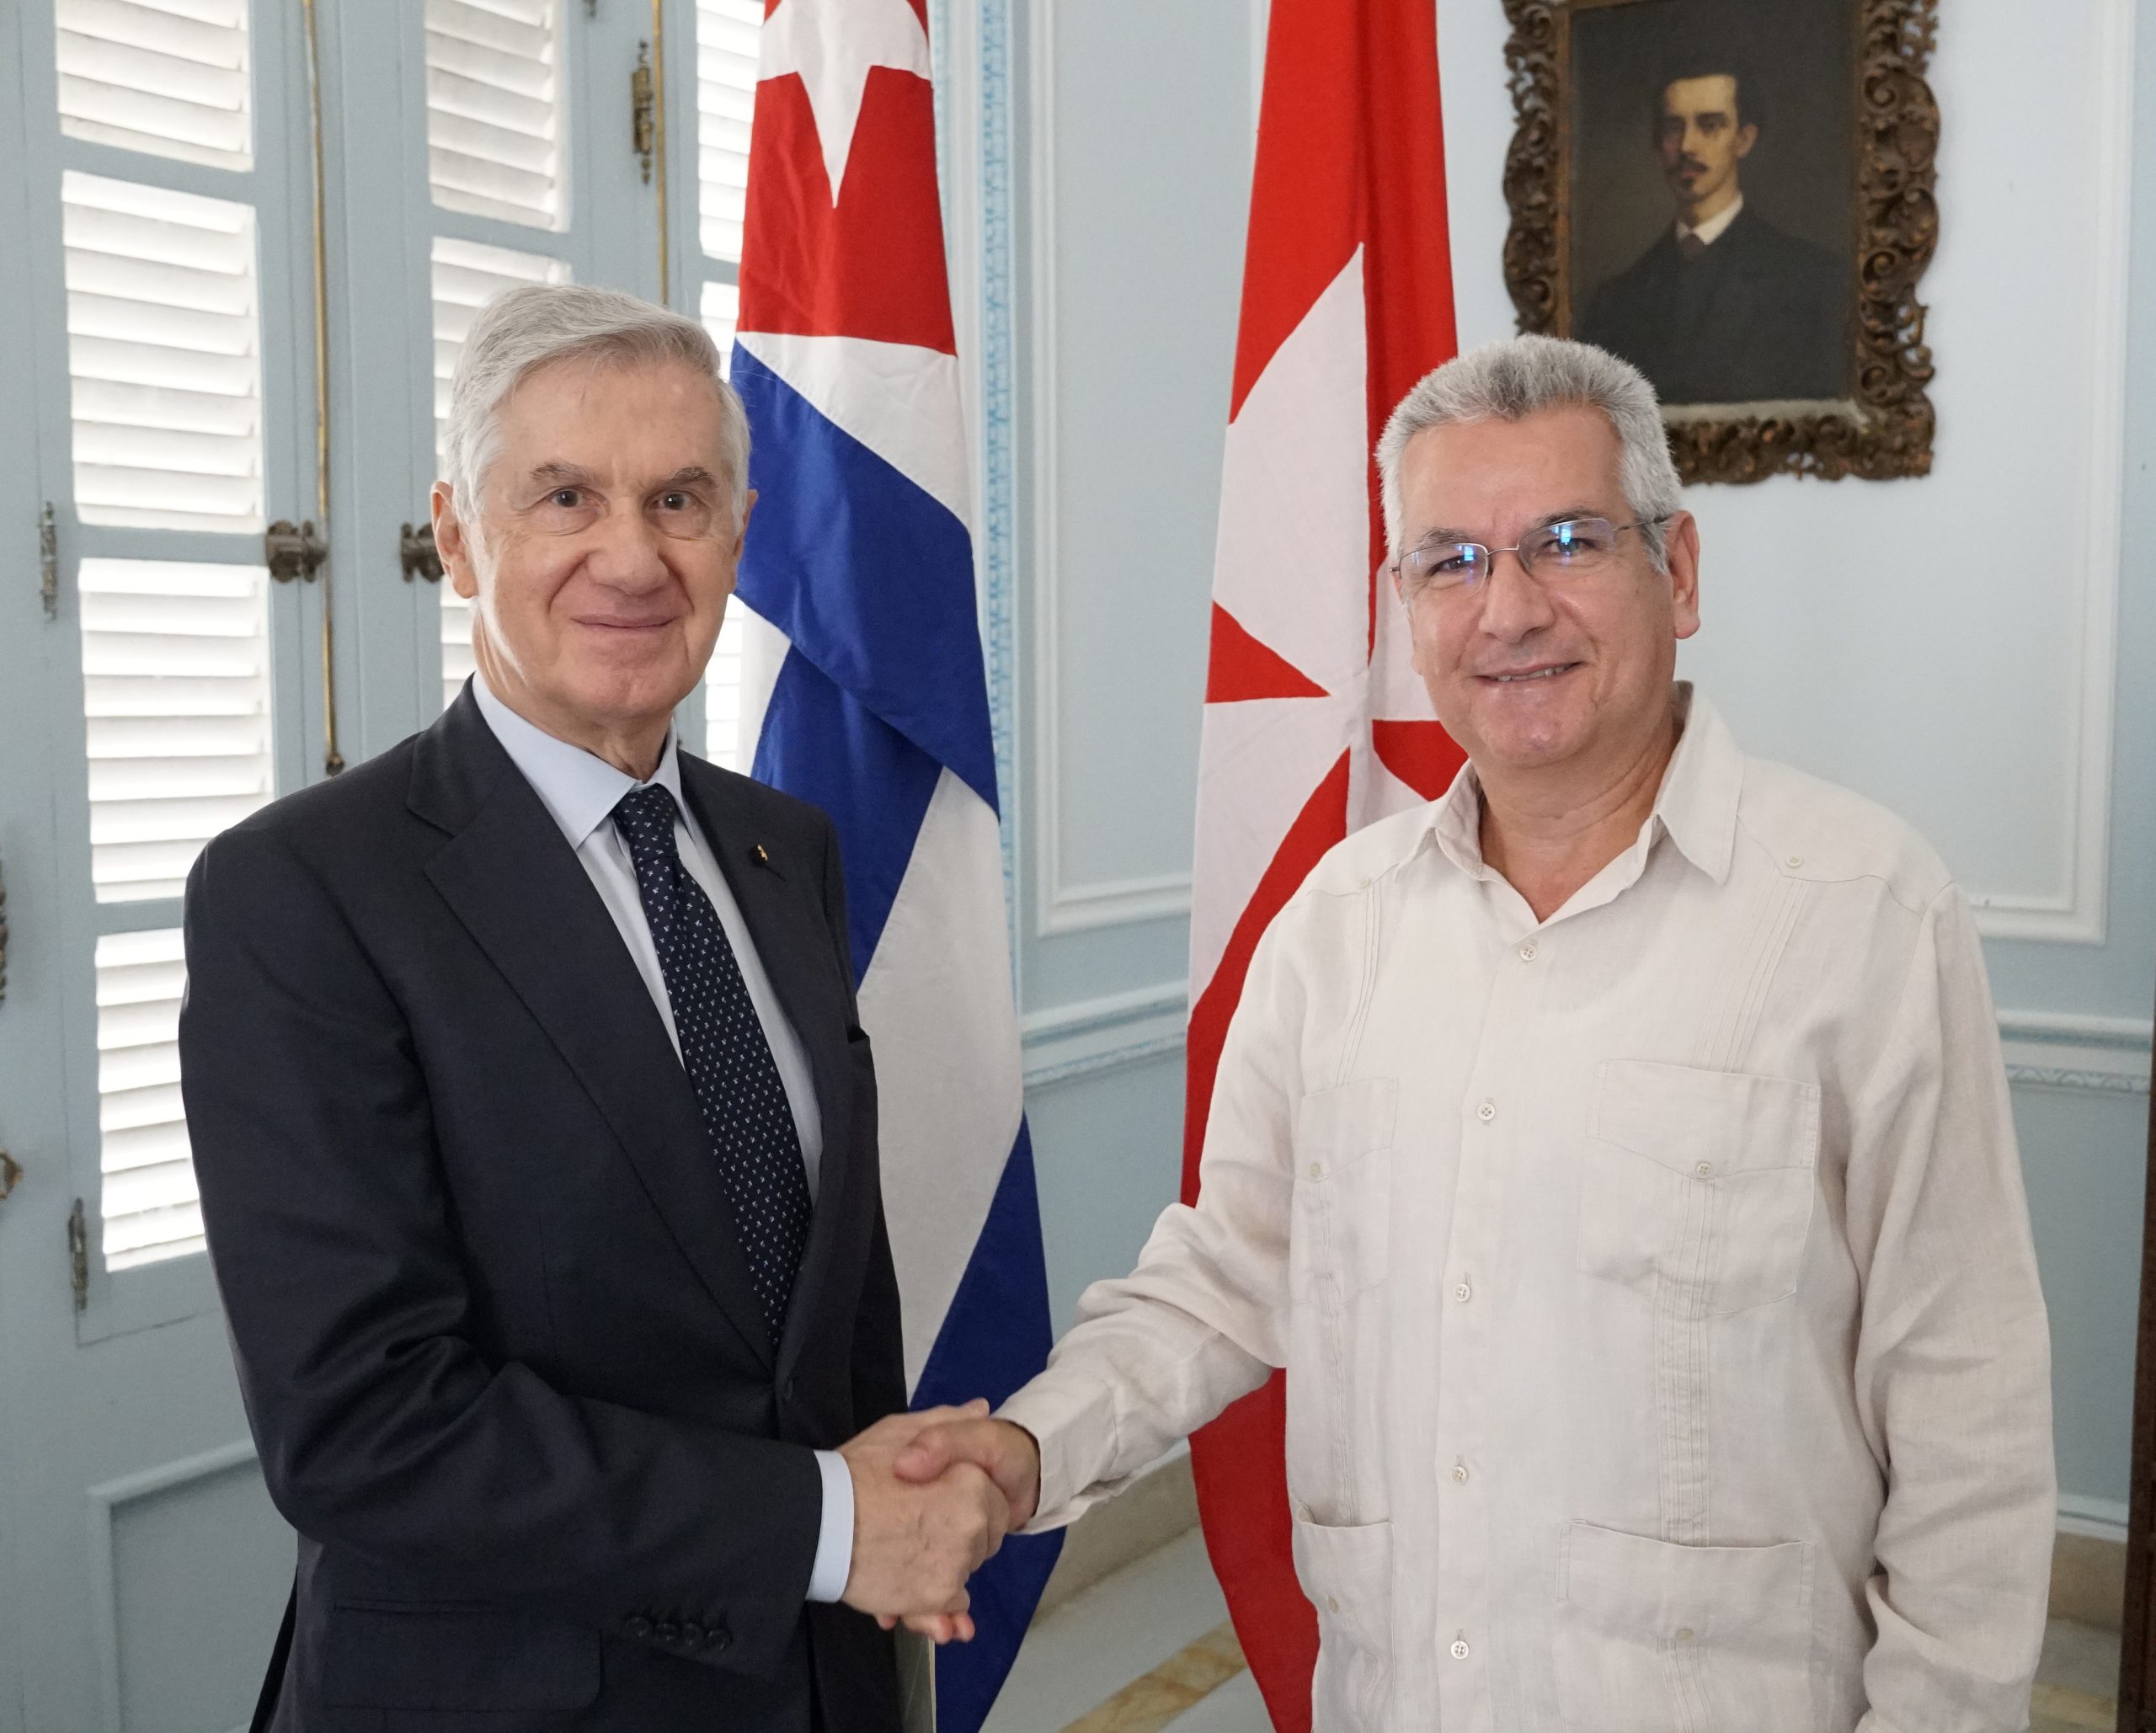 The new Ambassador presents Credentials to the Ministry of Foreign Affairs of the Republic of Cuba